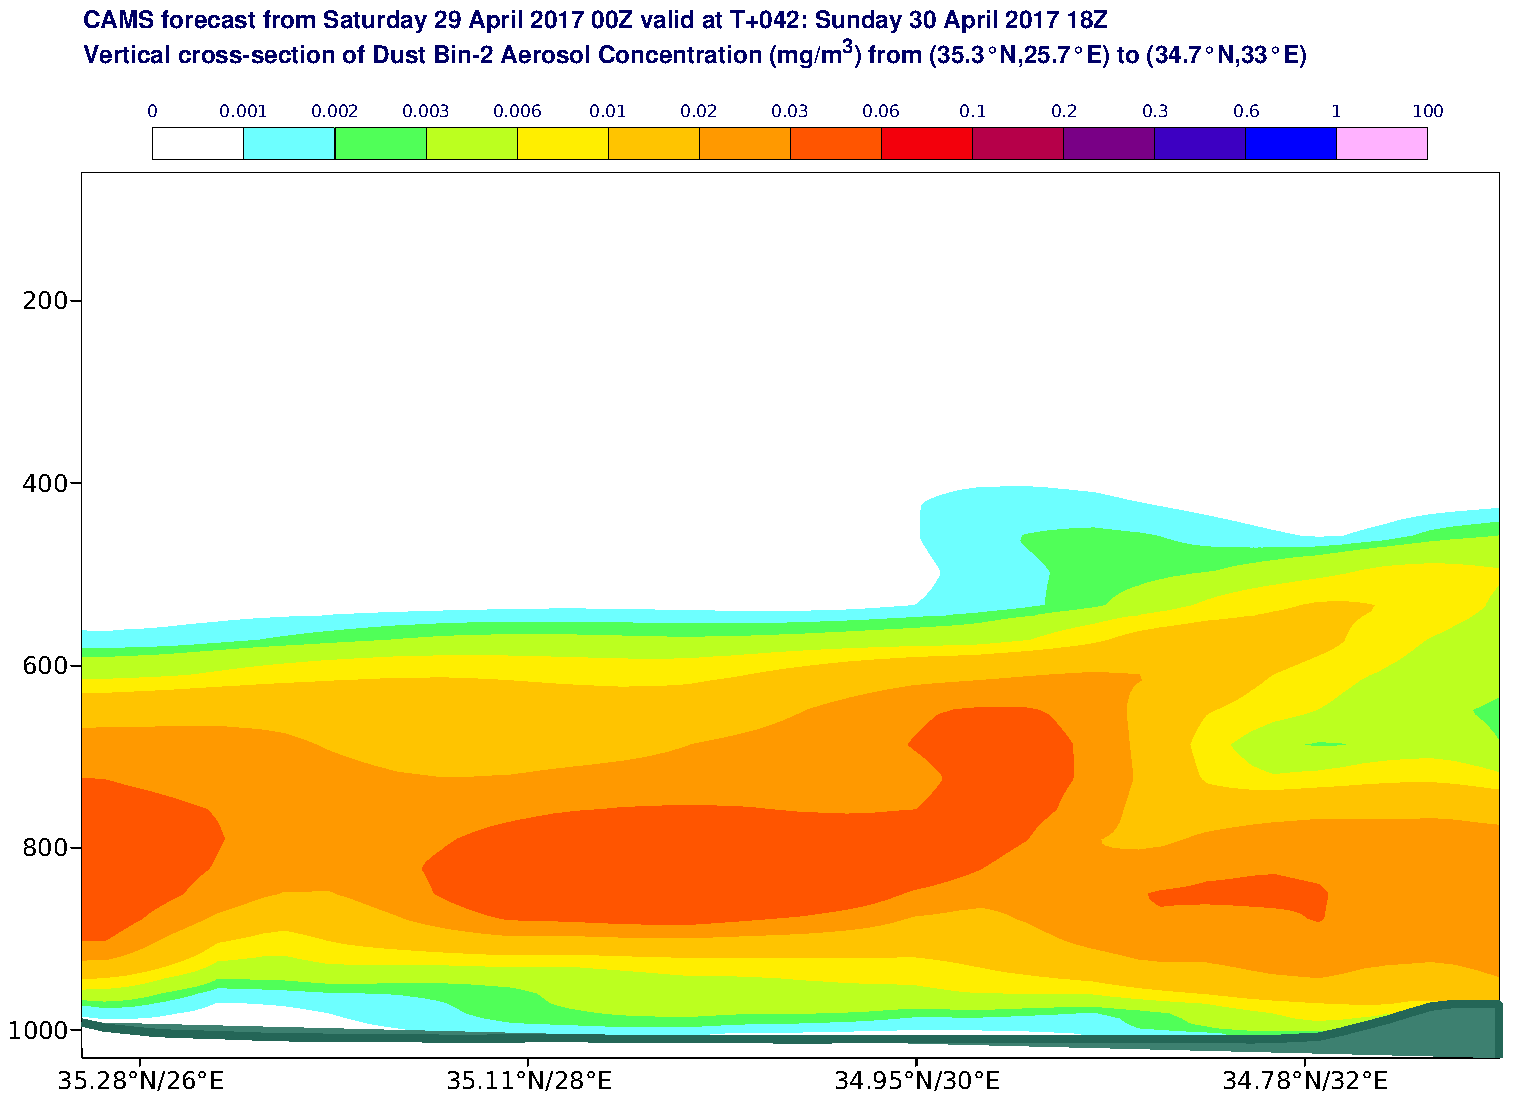 Vertical cross-section of Dust Bin-2 Aerosol Concentration (mg/m3) valid at T42 - 2017-04-30 18:00